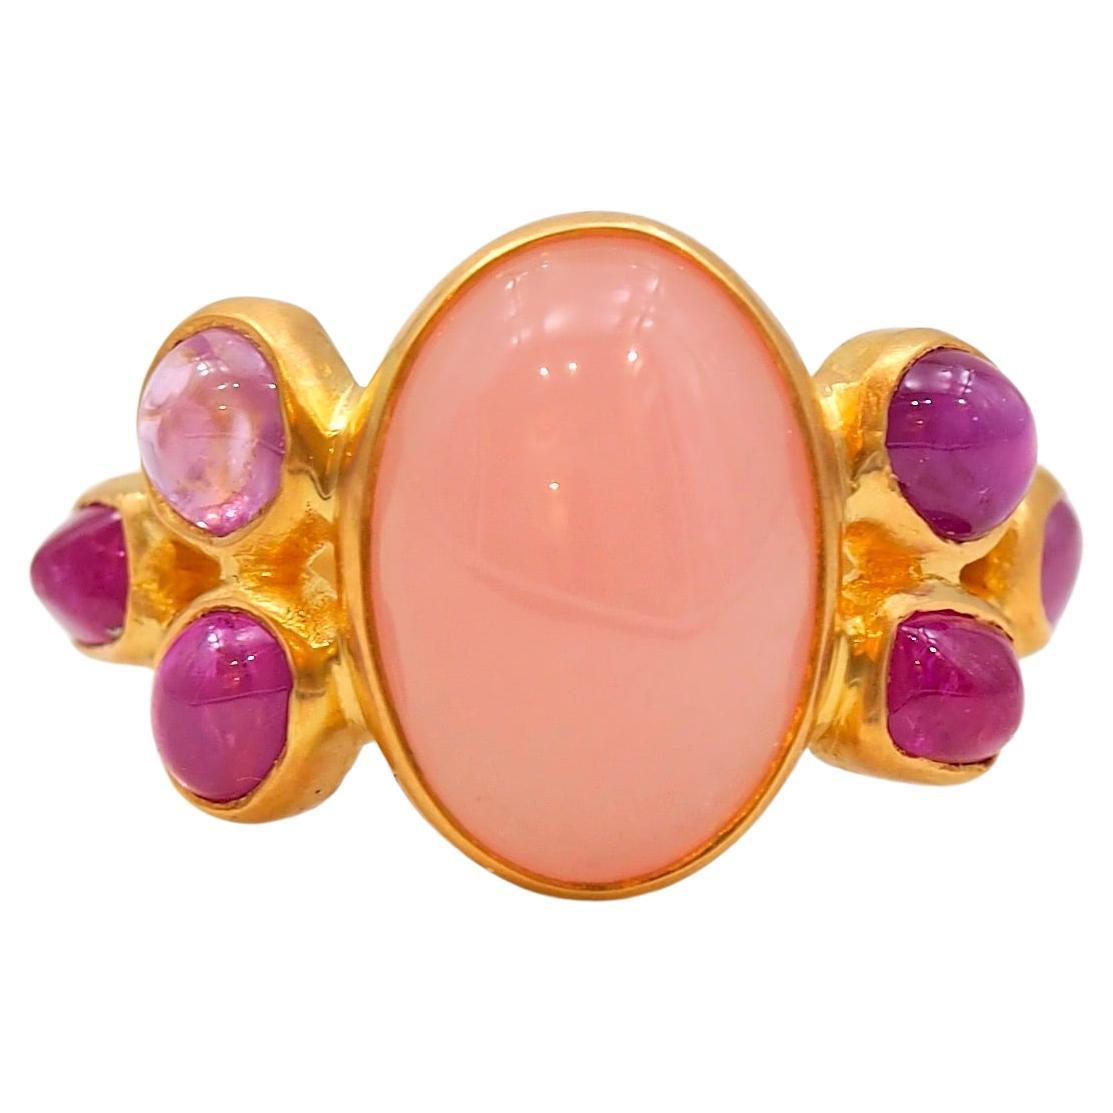 Scrives 5.25 Ct Peach Chalcedony 3.06 Ct Pink sapphire Cabochon 22 Kt Gold Ring